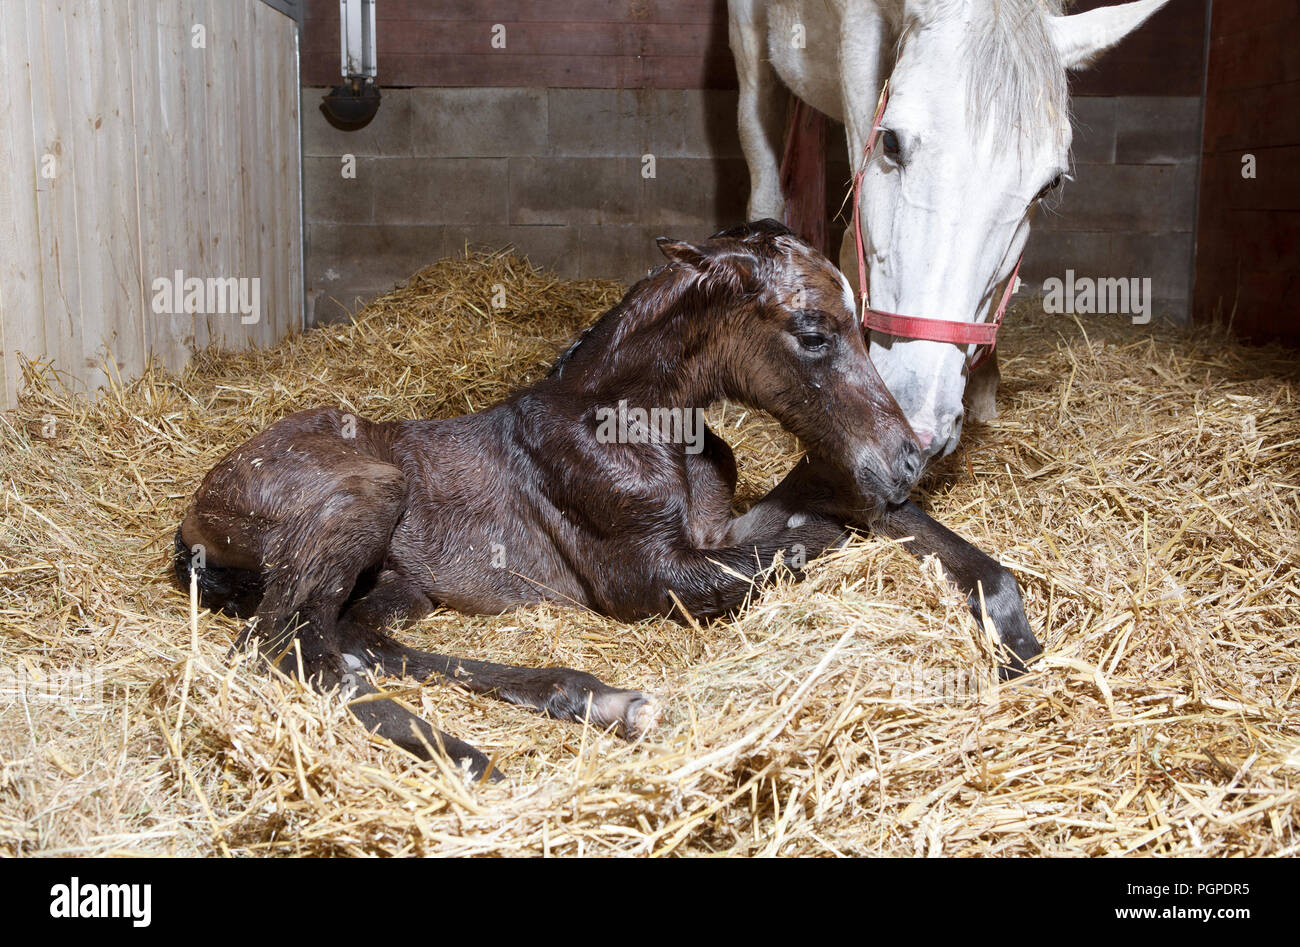 a brown foal is born in a horse box and lies in the straw Stock Photo